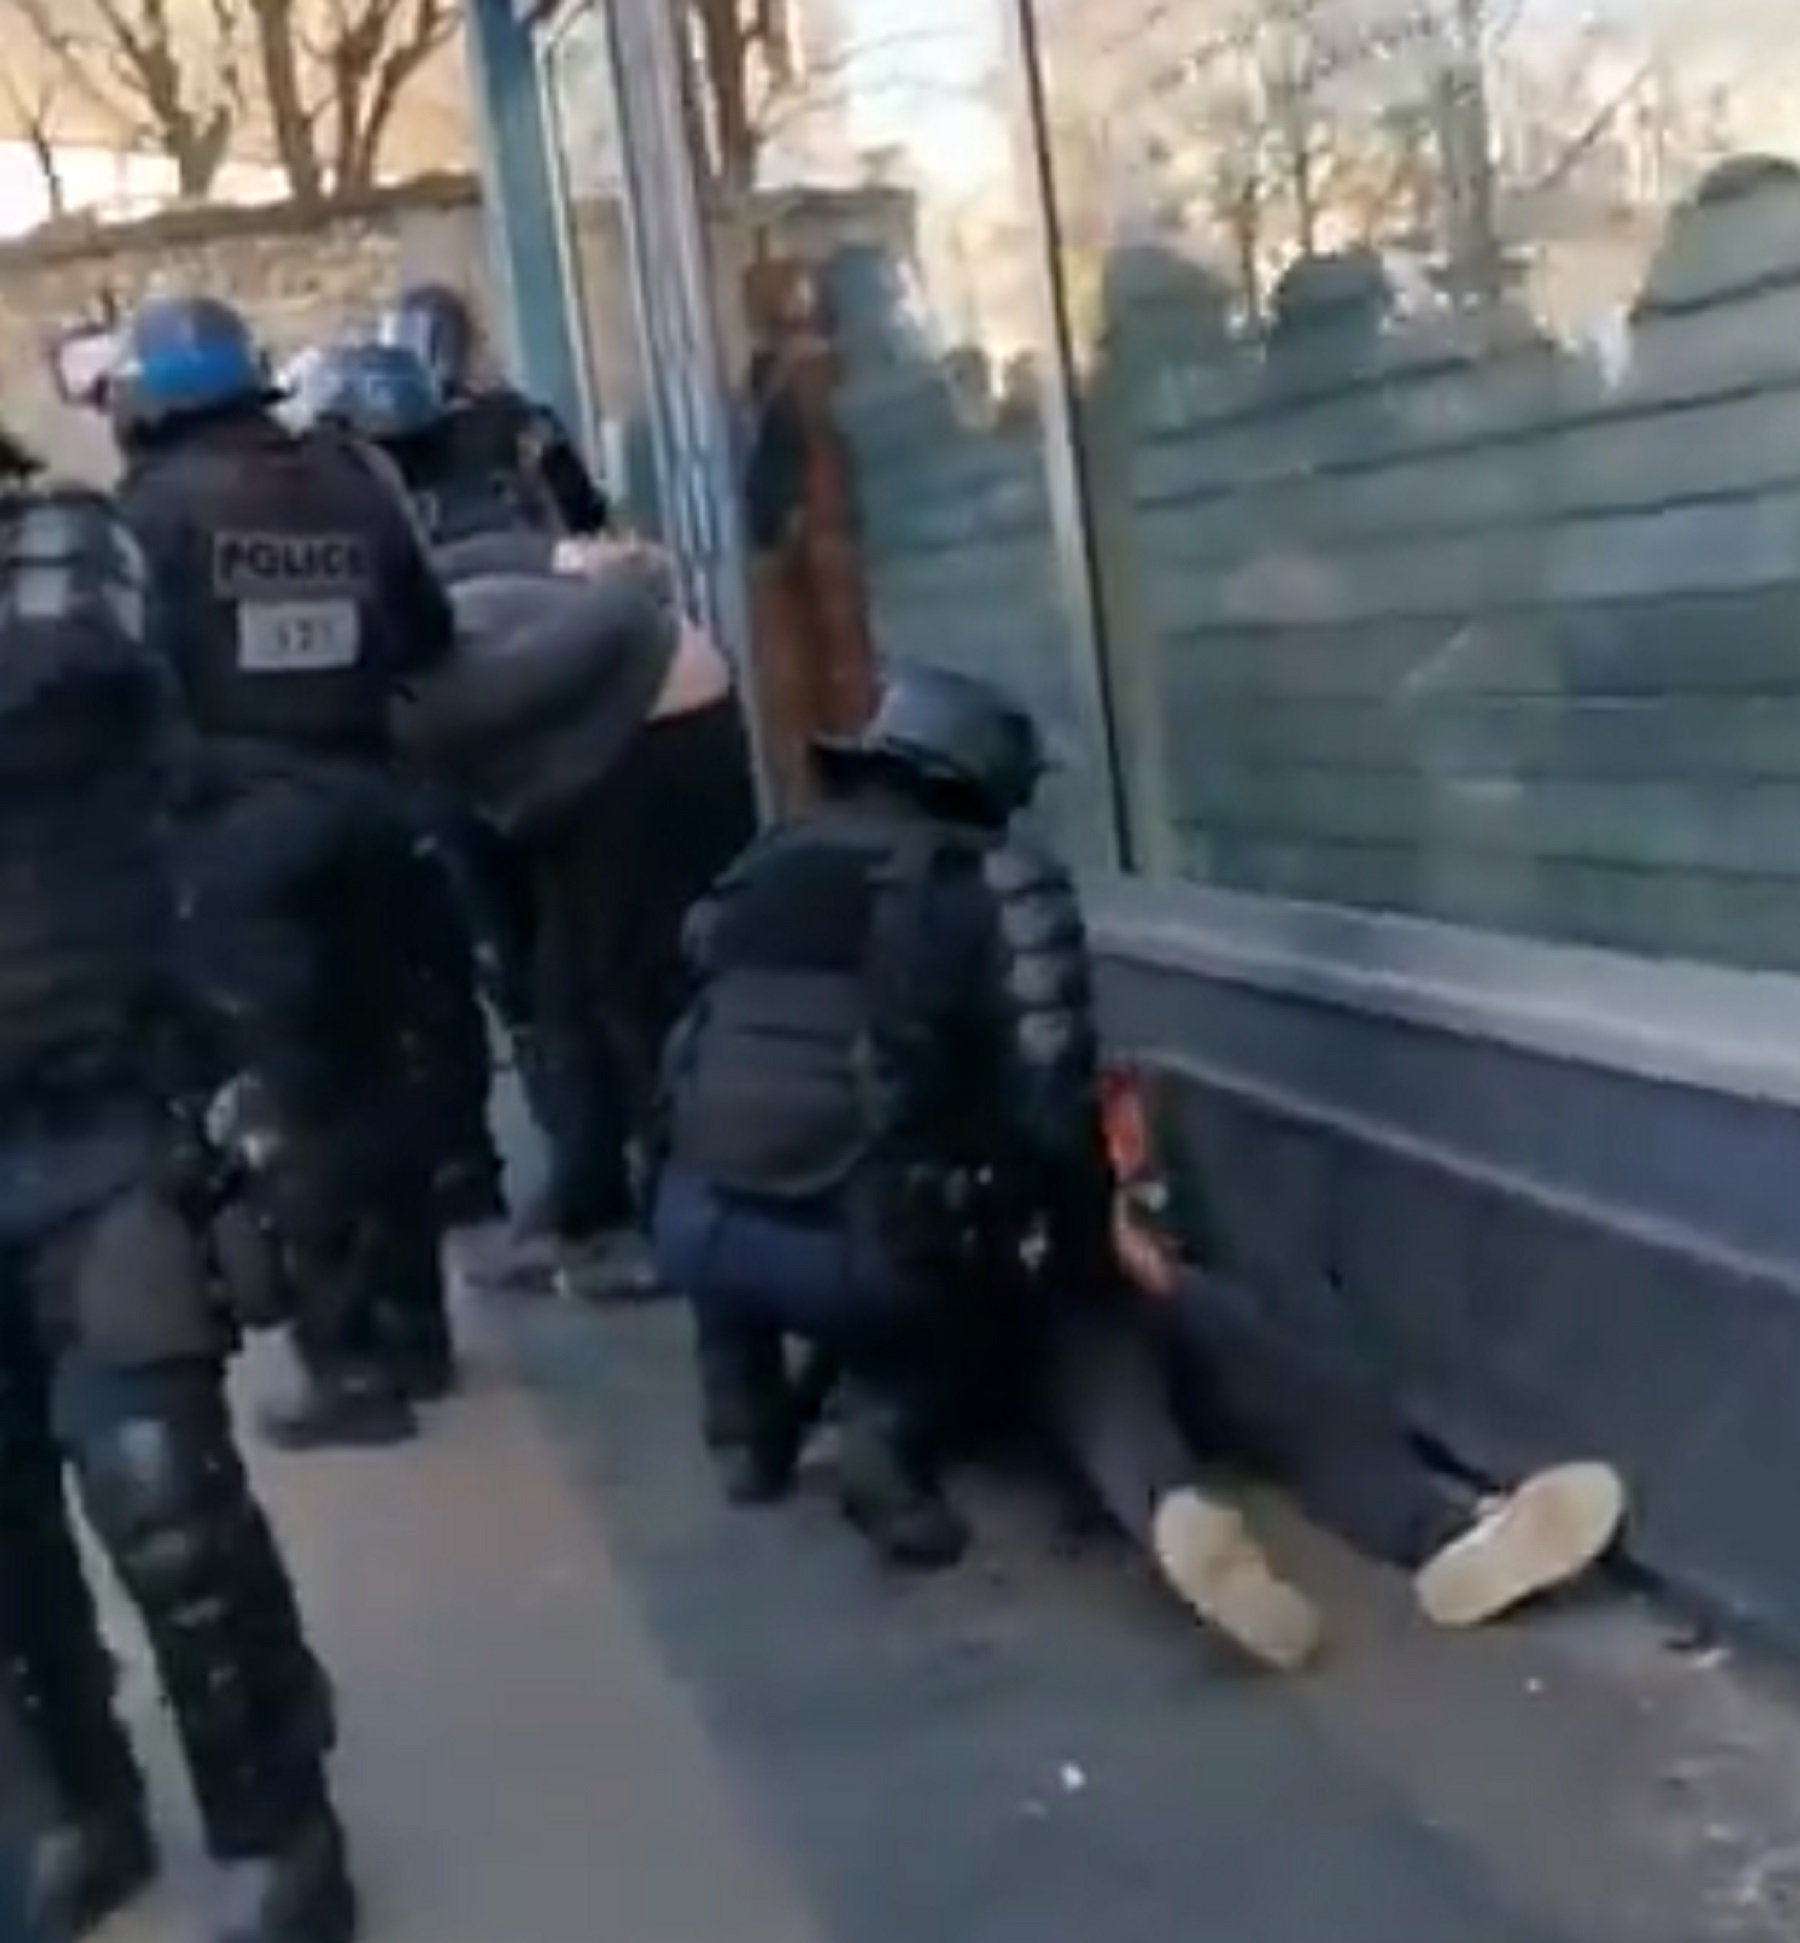 In France they investigate: inquiry opened into police who brutally beat a protester